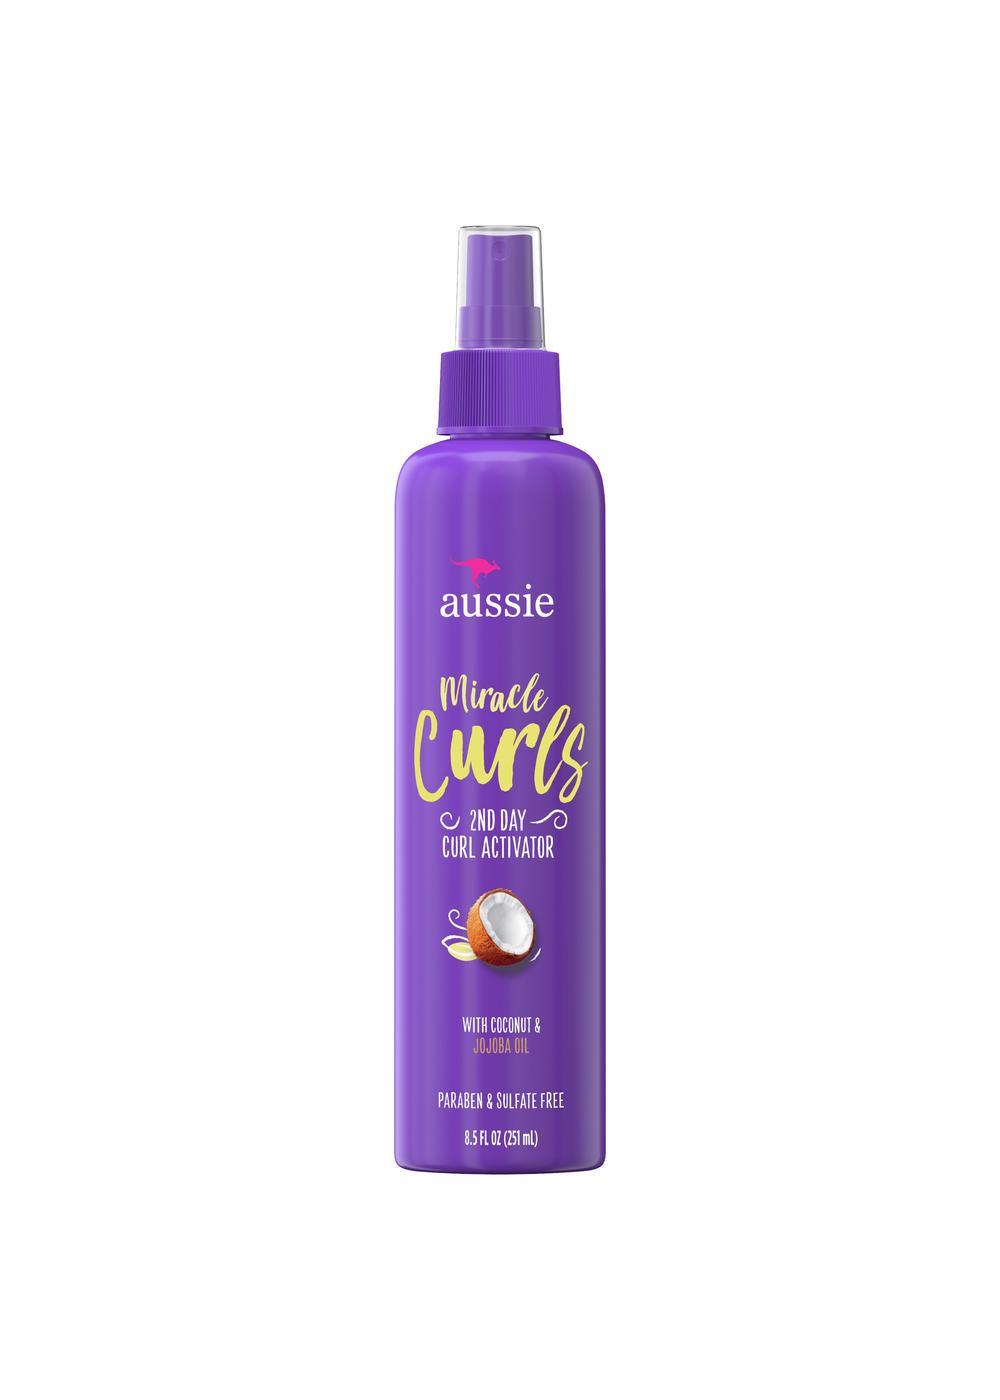 Aussie Miracle Curls 2nd Day Curl Activator; image 1 of 8